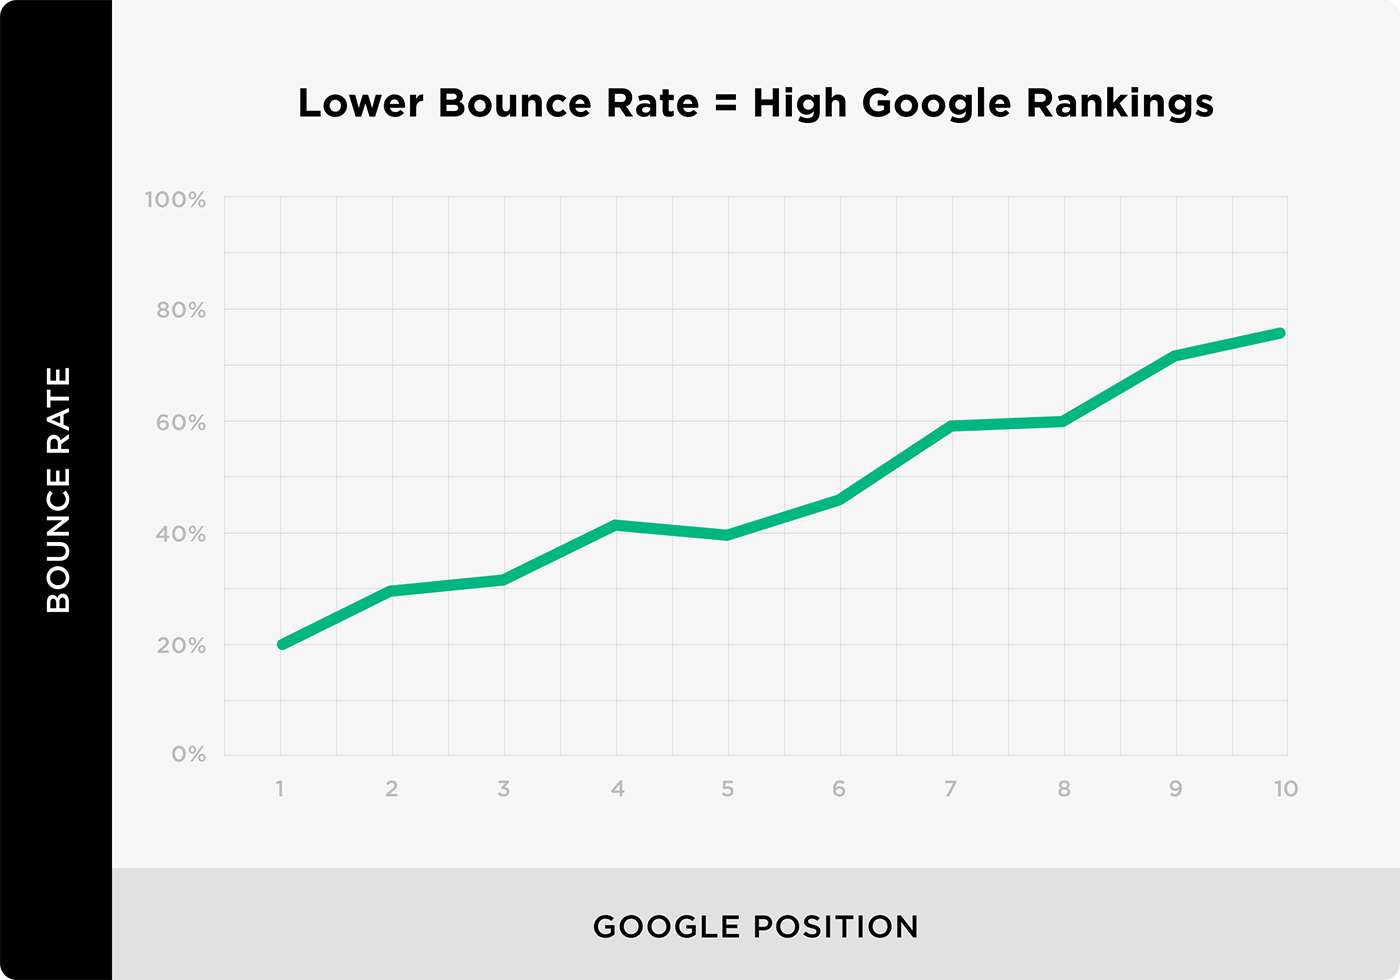 Lower bounce rate = High Google rankings